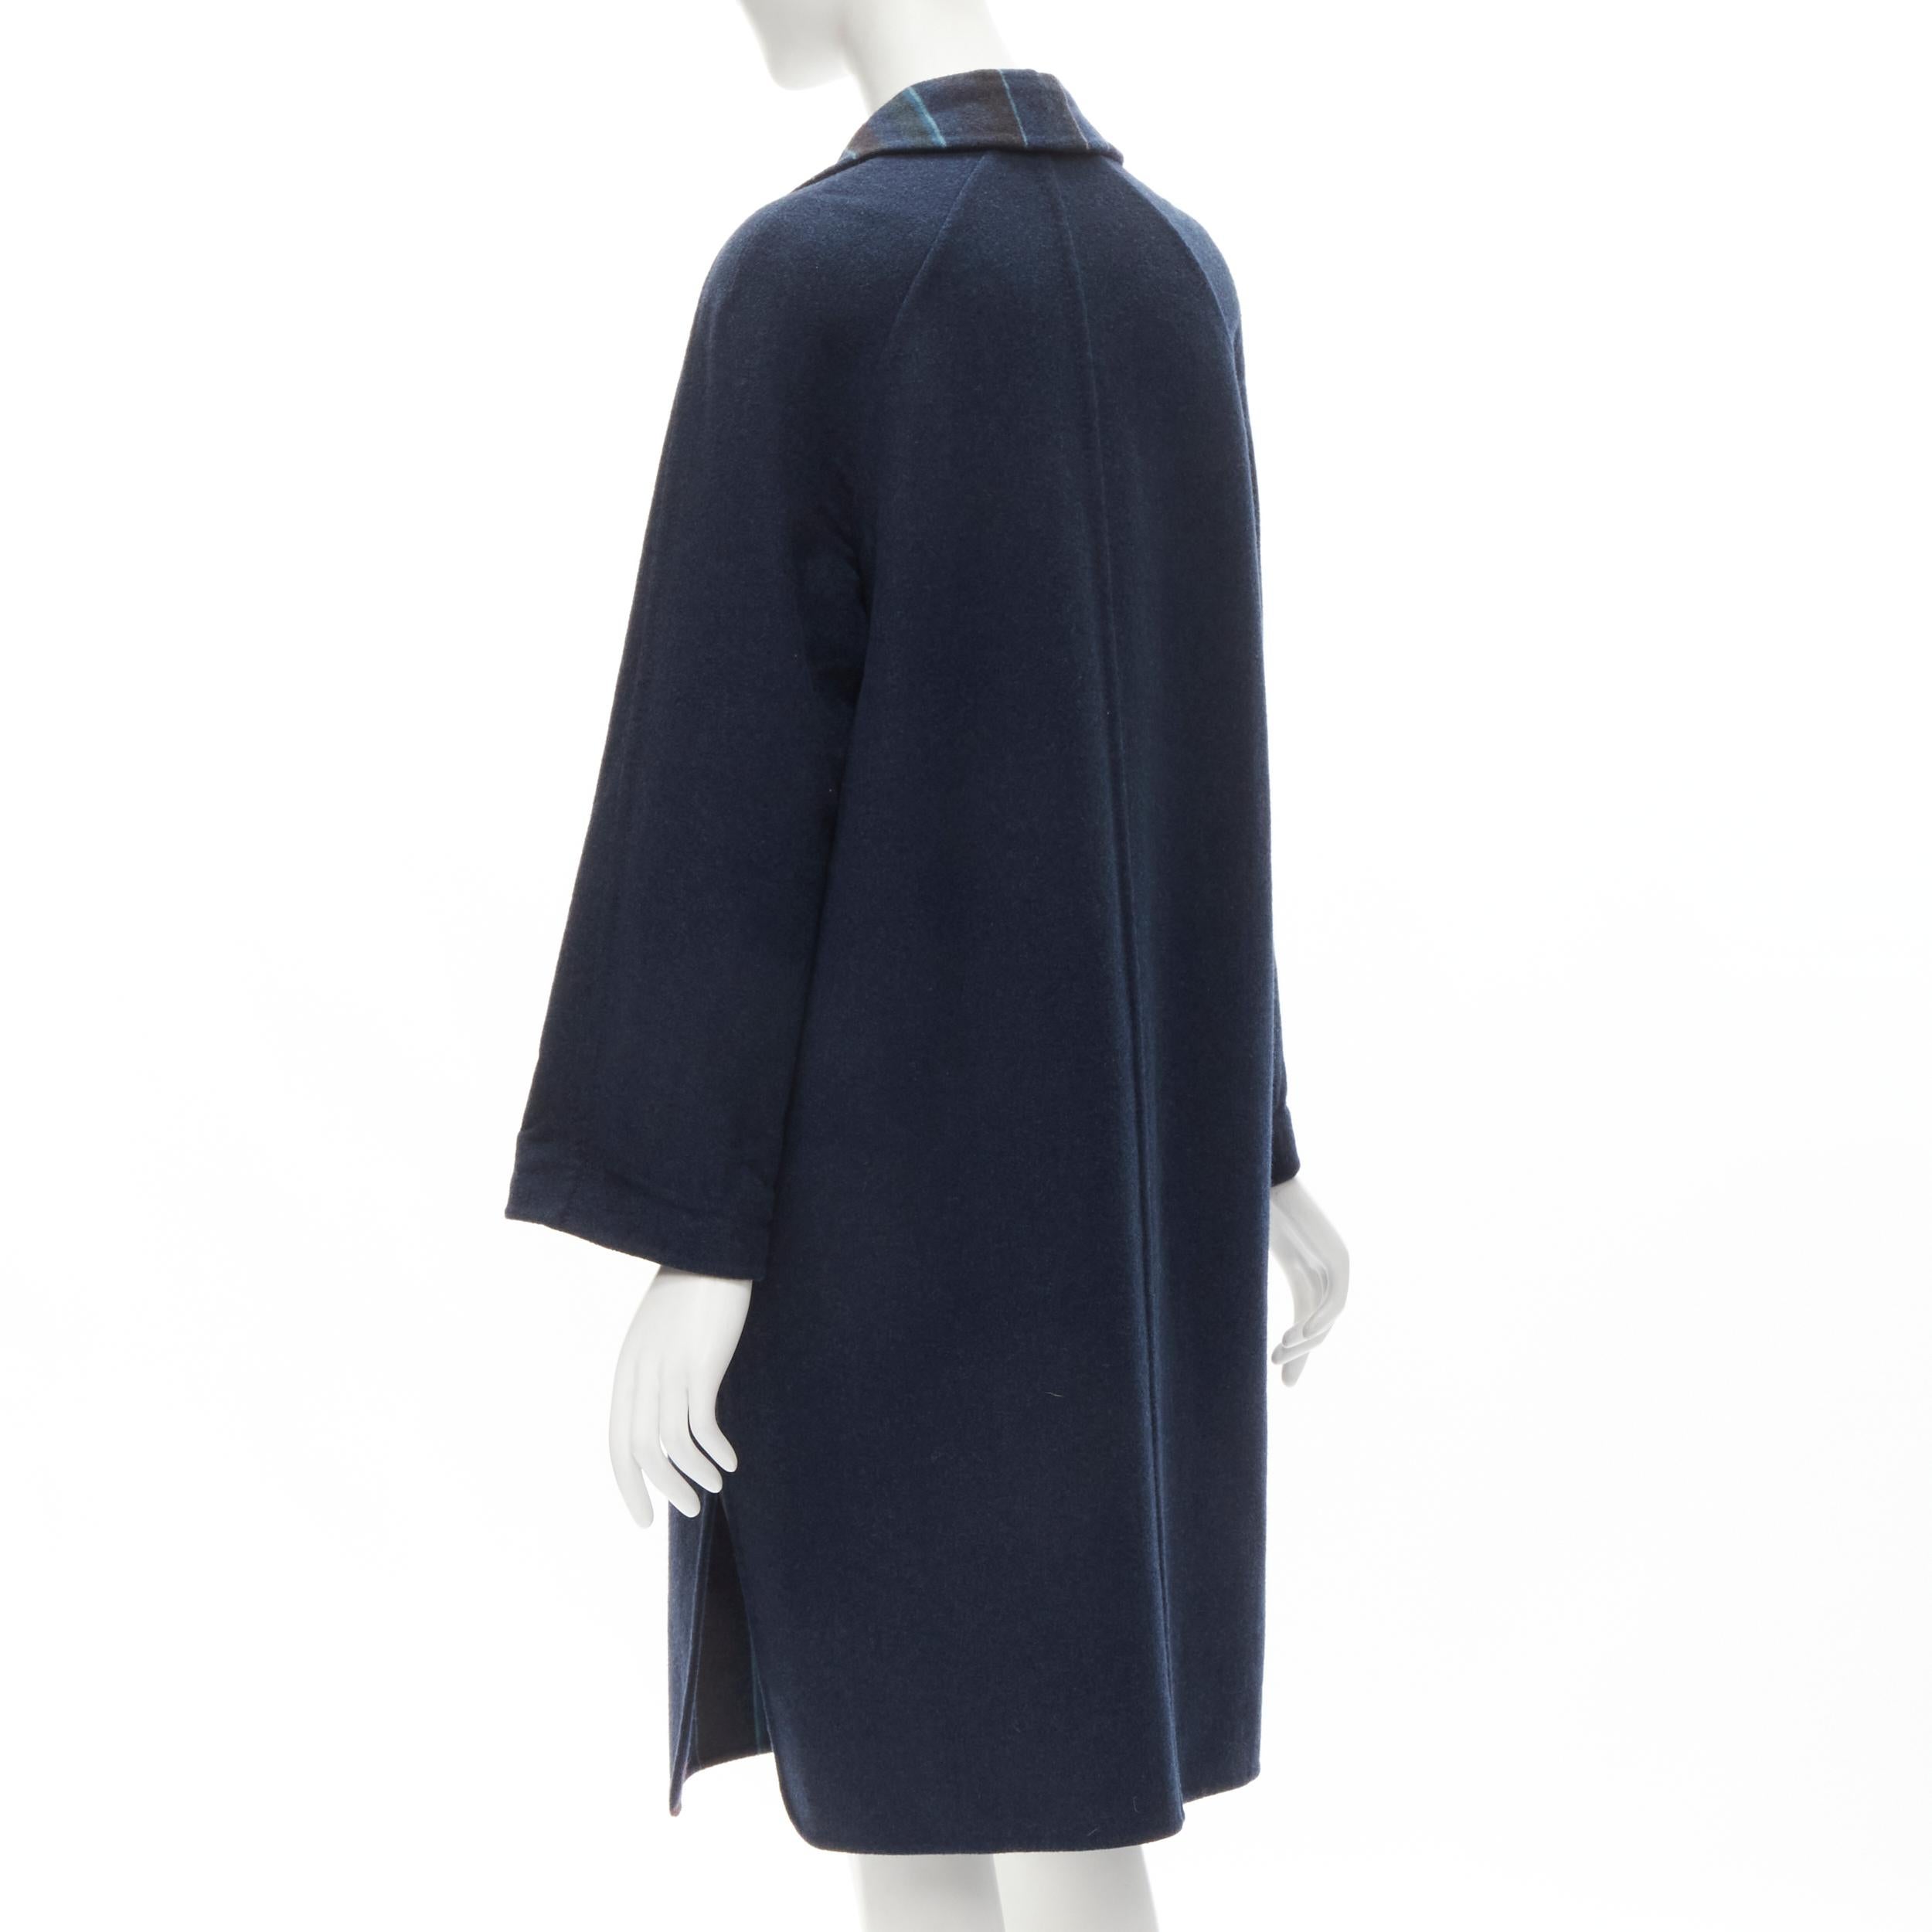 HERMES navy double faced virgin wool cashmere stripe lining maxi coat FR34 XS 3